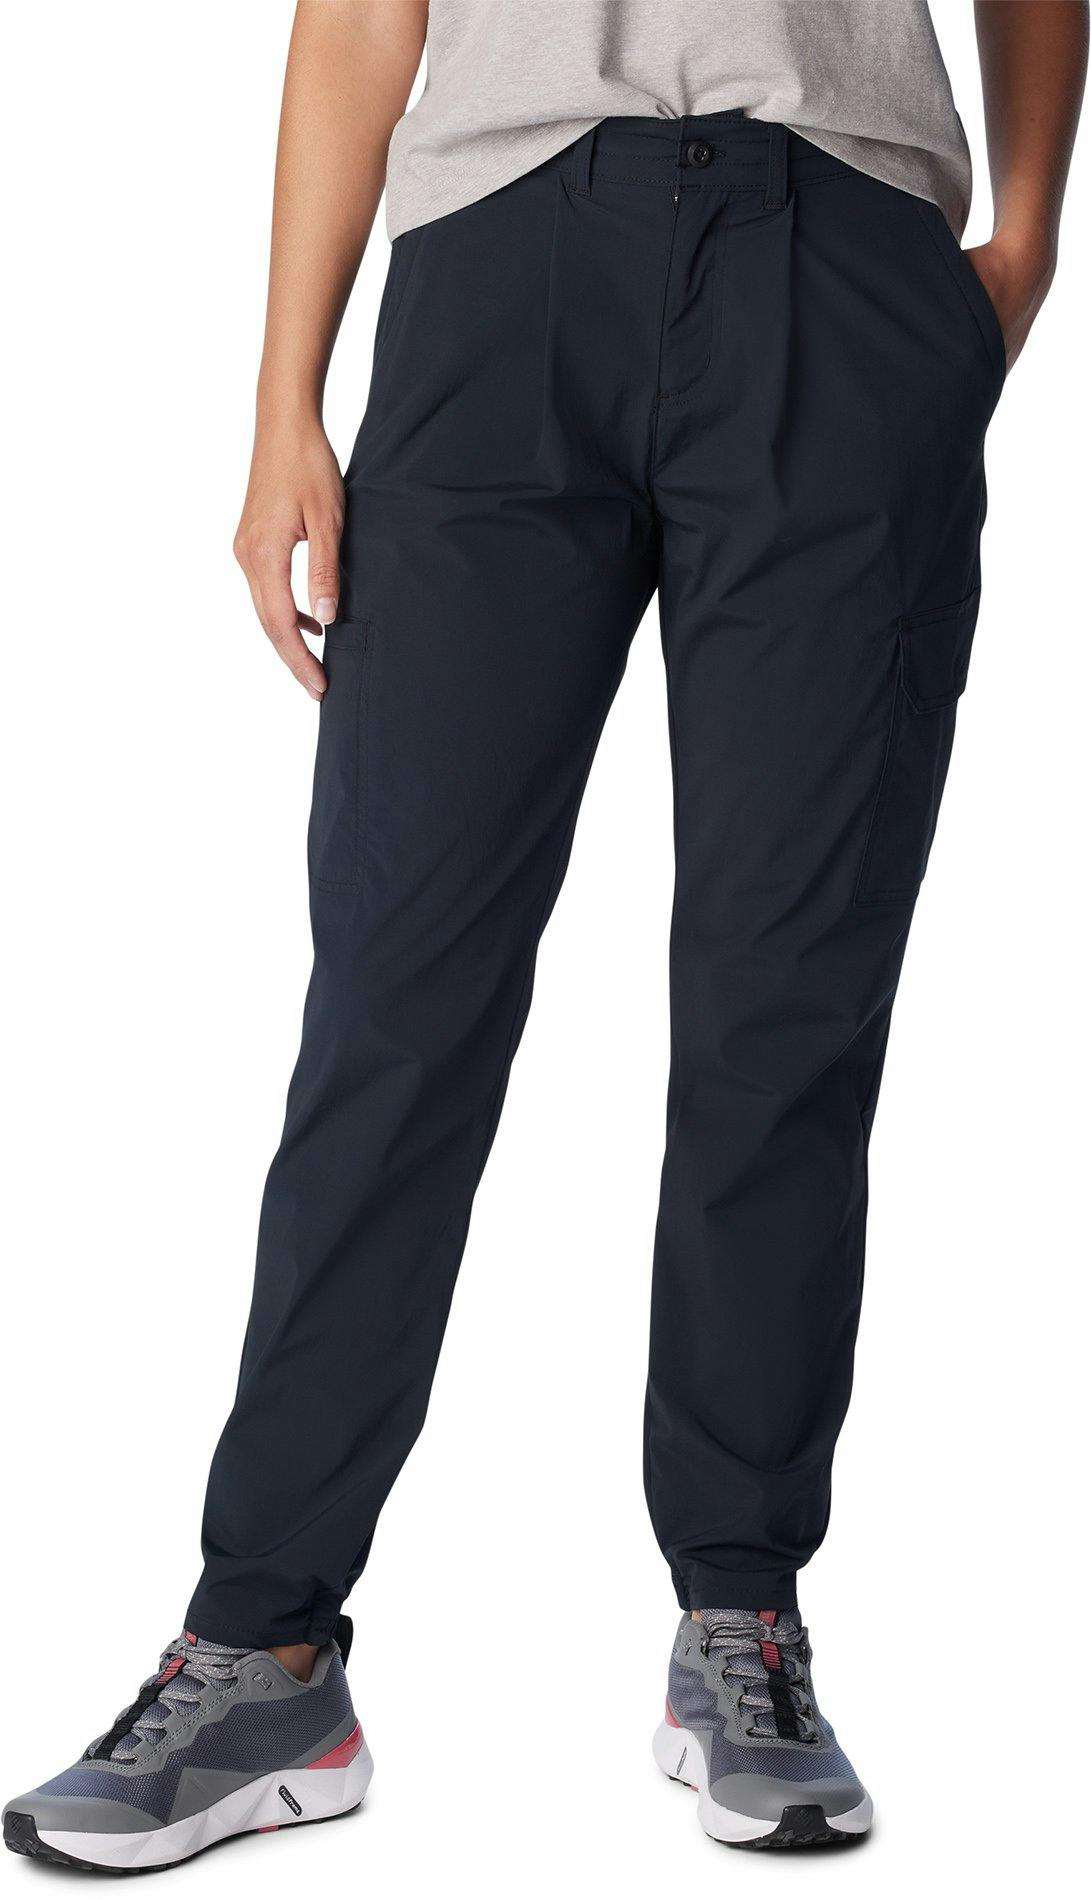 Product image for Boundless Trek Pleated Pants - Women's 